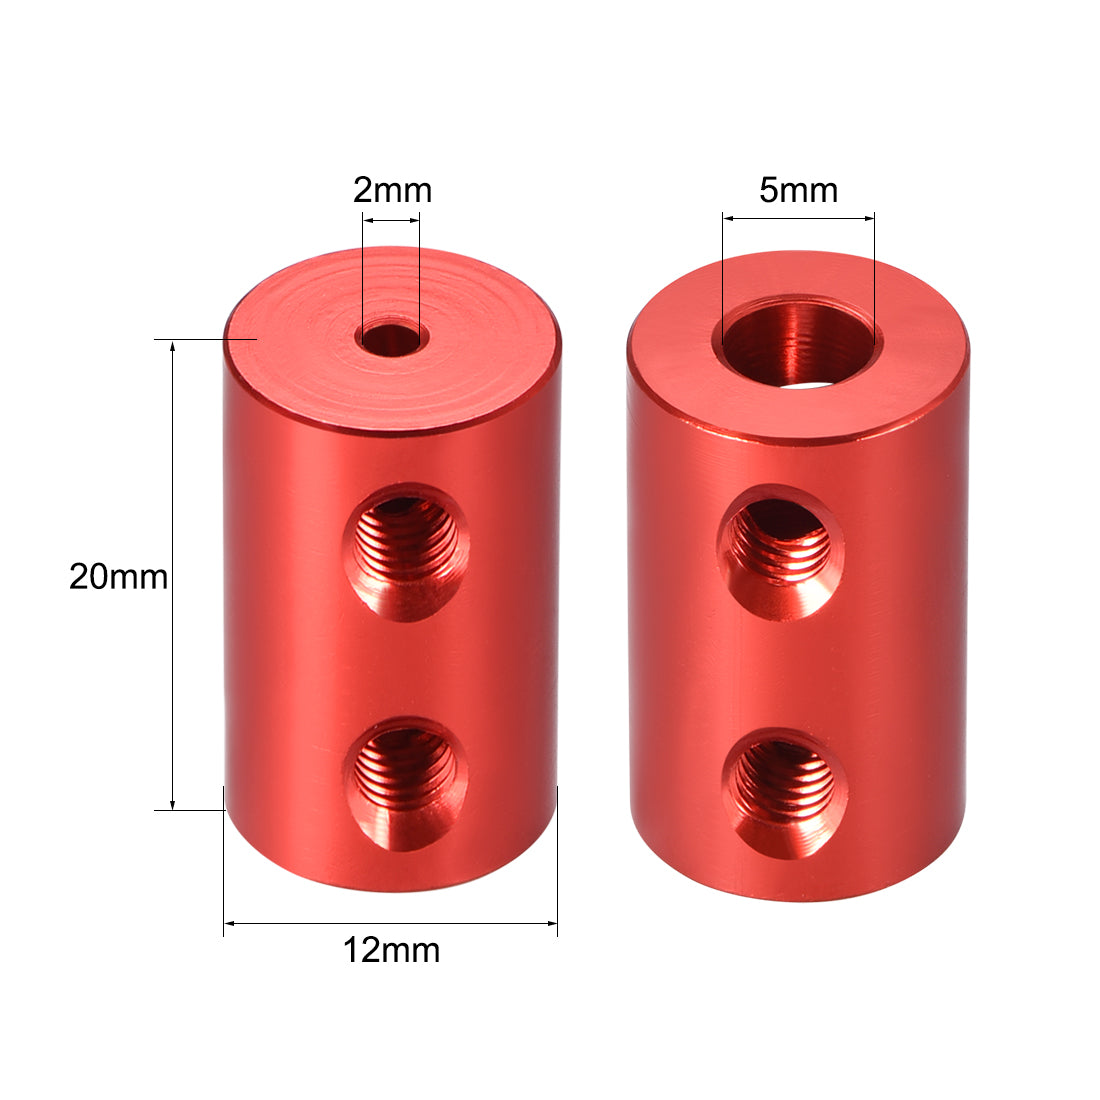 uxcell Uxcell Shaft Coupling 2mm to 5mm Bore L20xD12 Robot Motor Wheel Rigid Coupler Connector Red